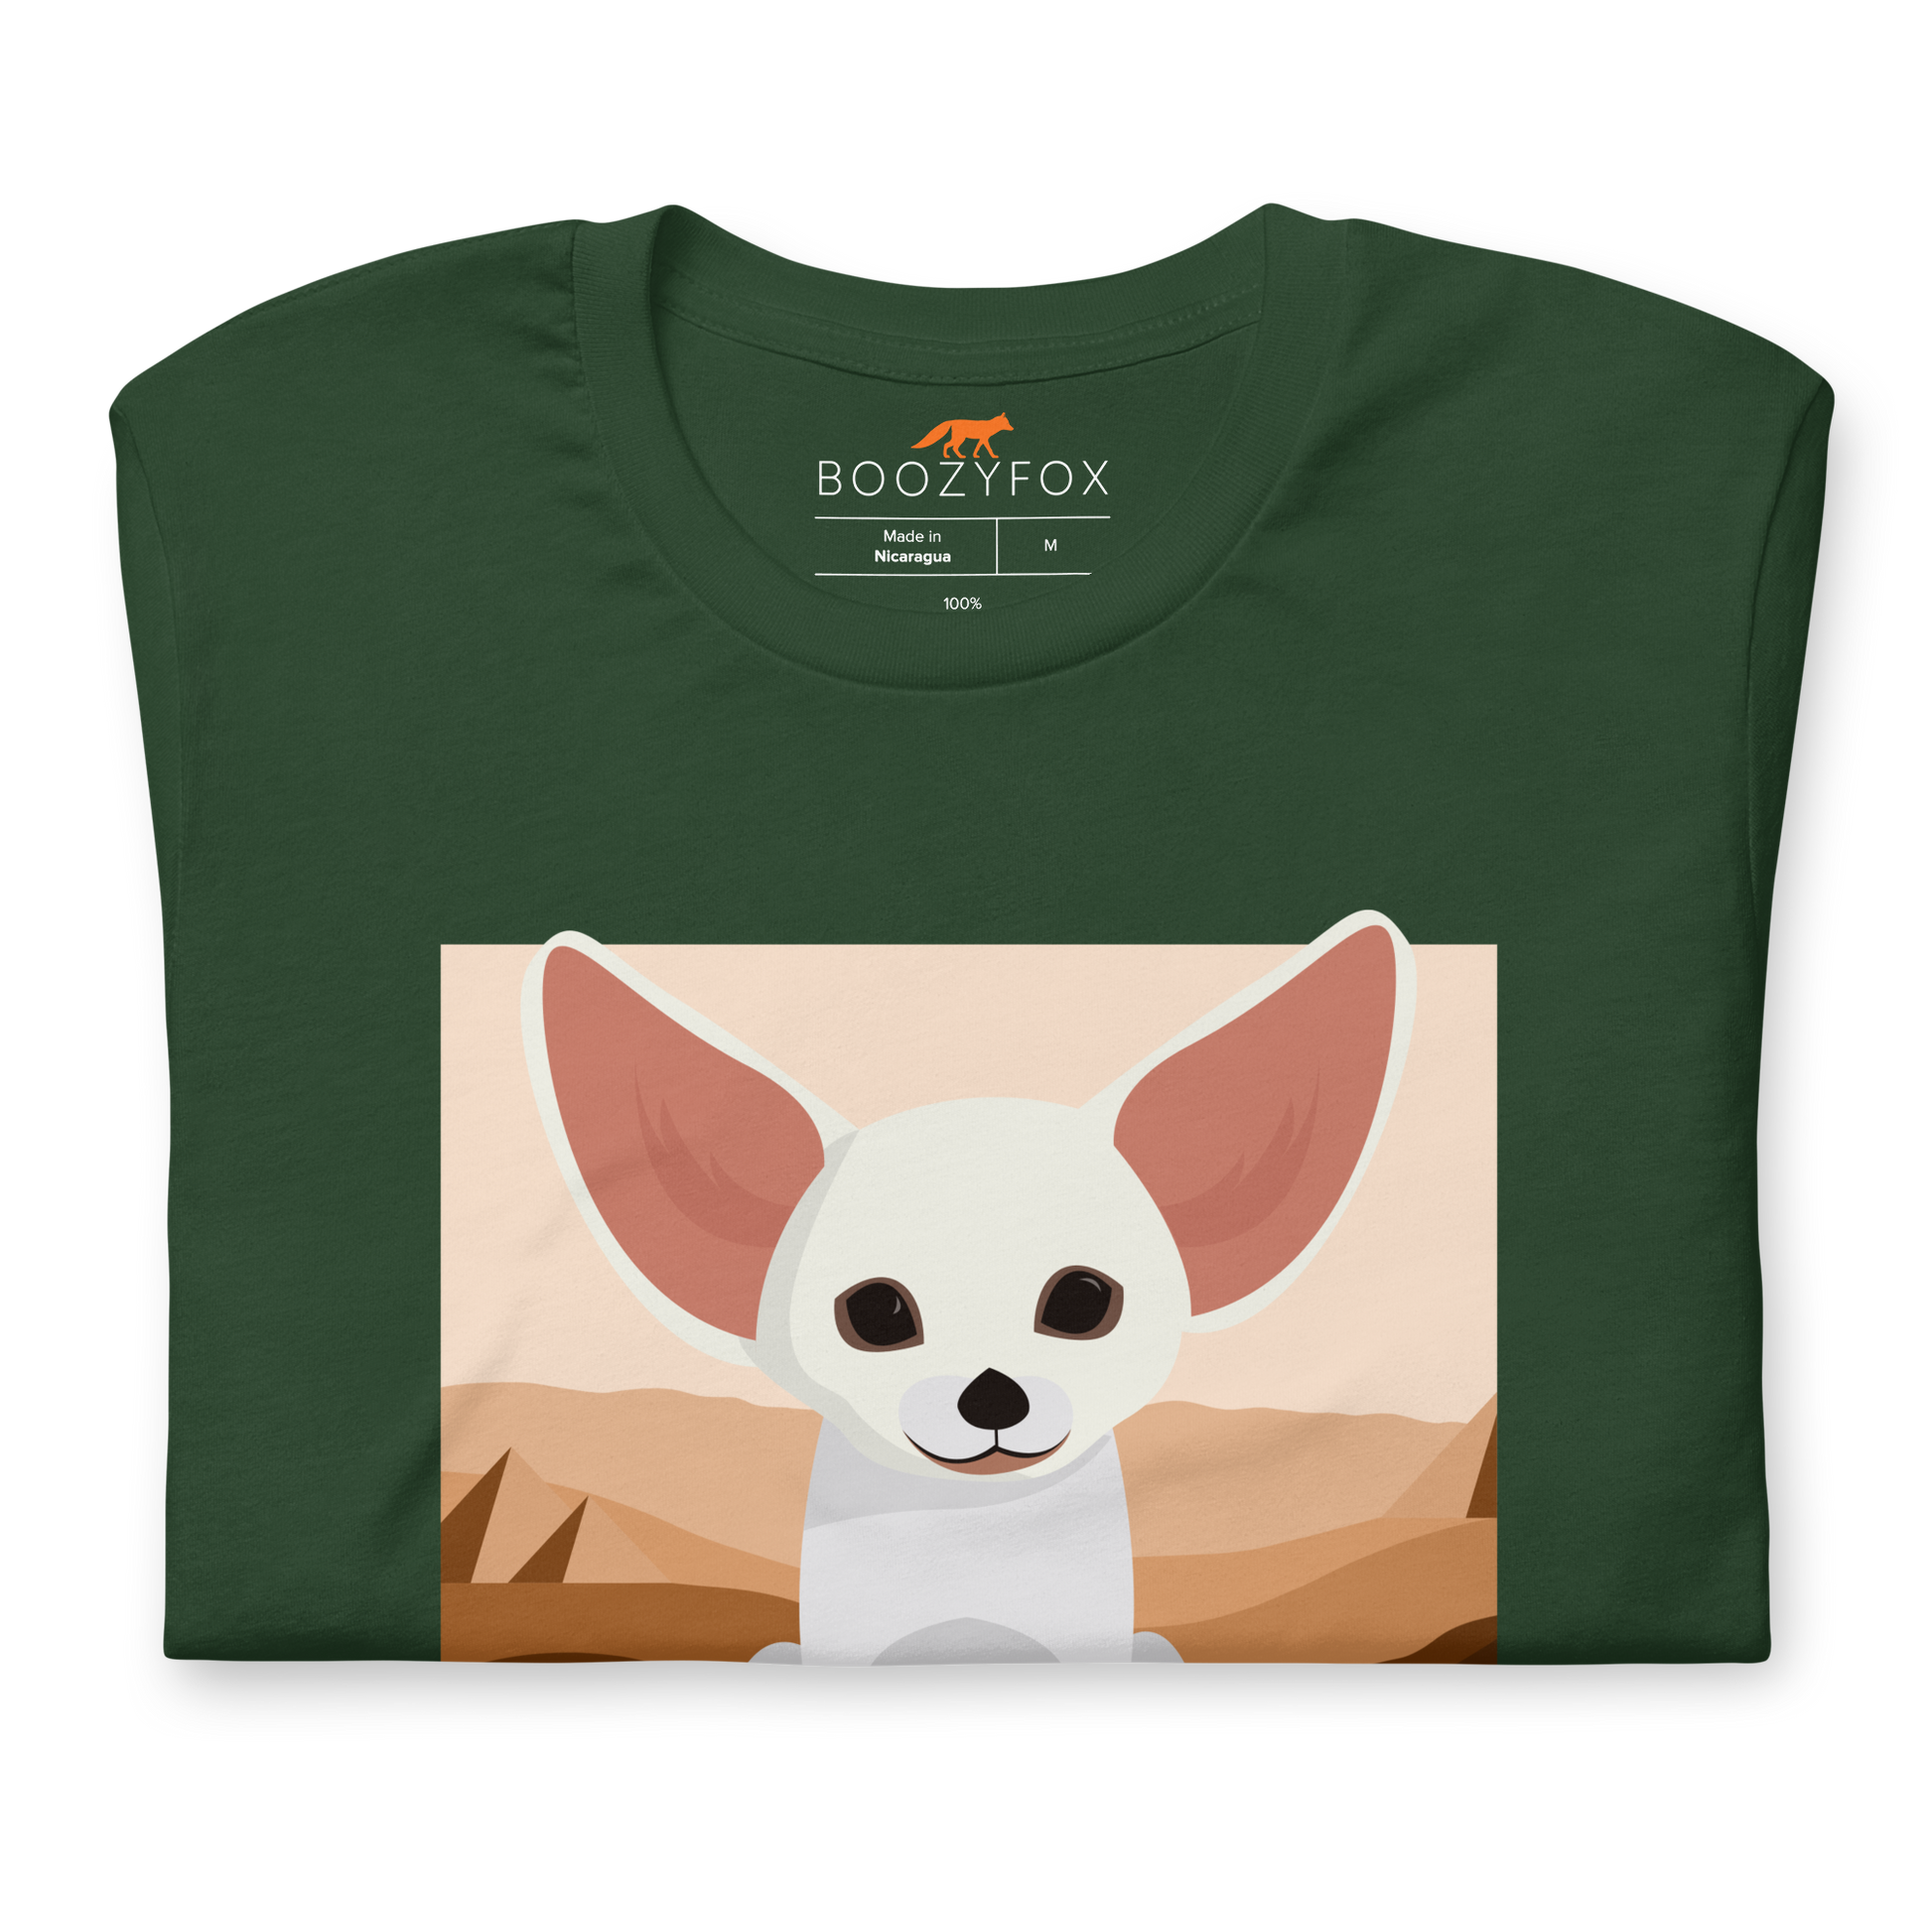 Front Details of a Forest Green Premium Fennec Fox T-Shirt featuring an adorable Dessert Addict graphic on the chest - Cute Graphic Fennec Fox Tees - Boozy Fox